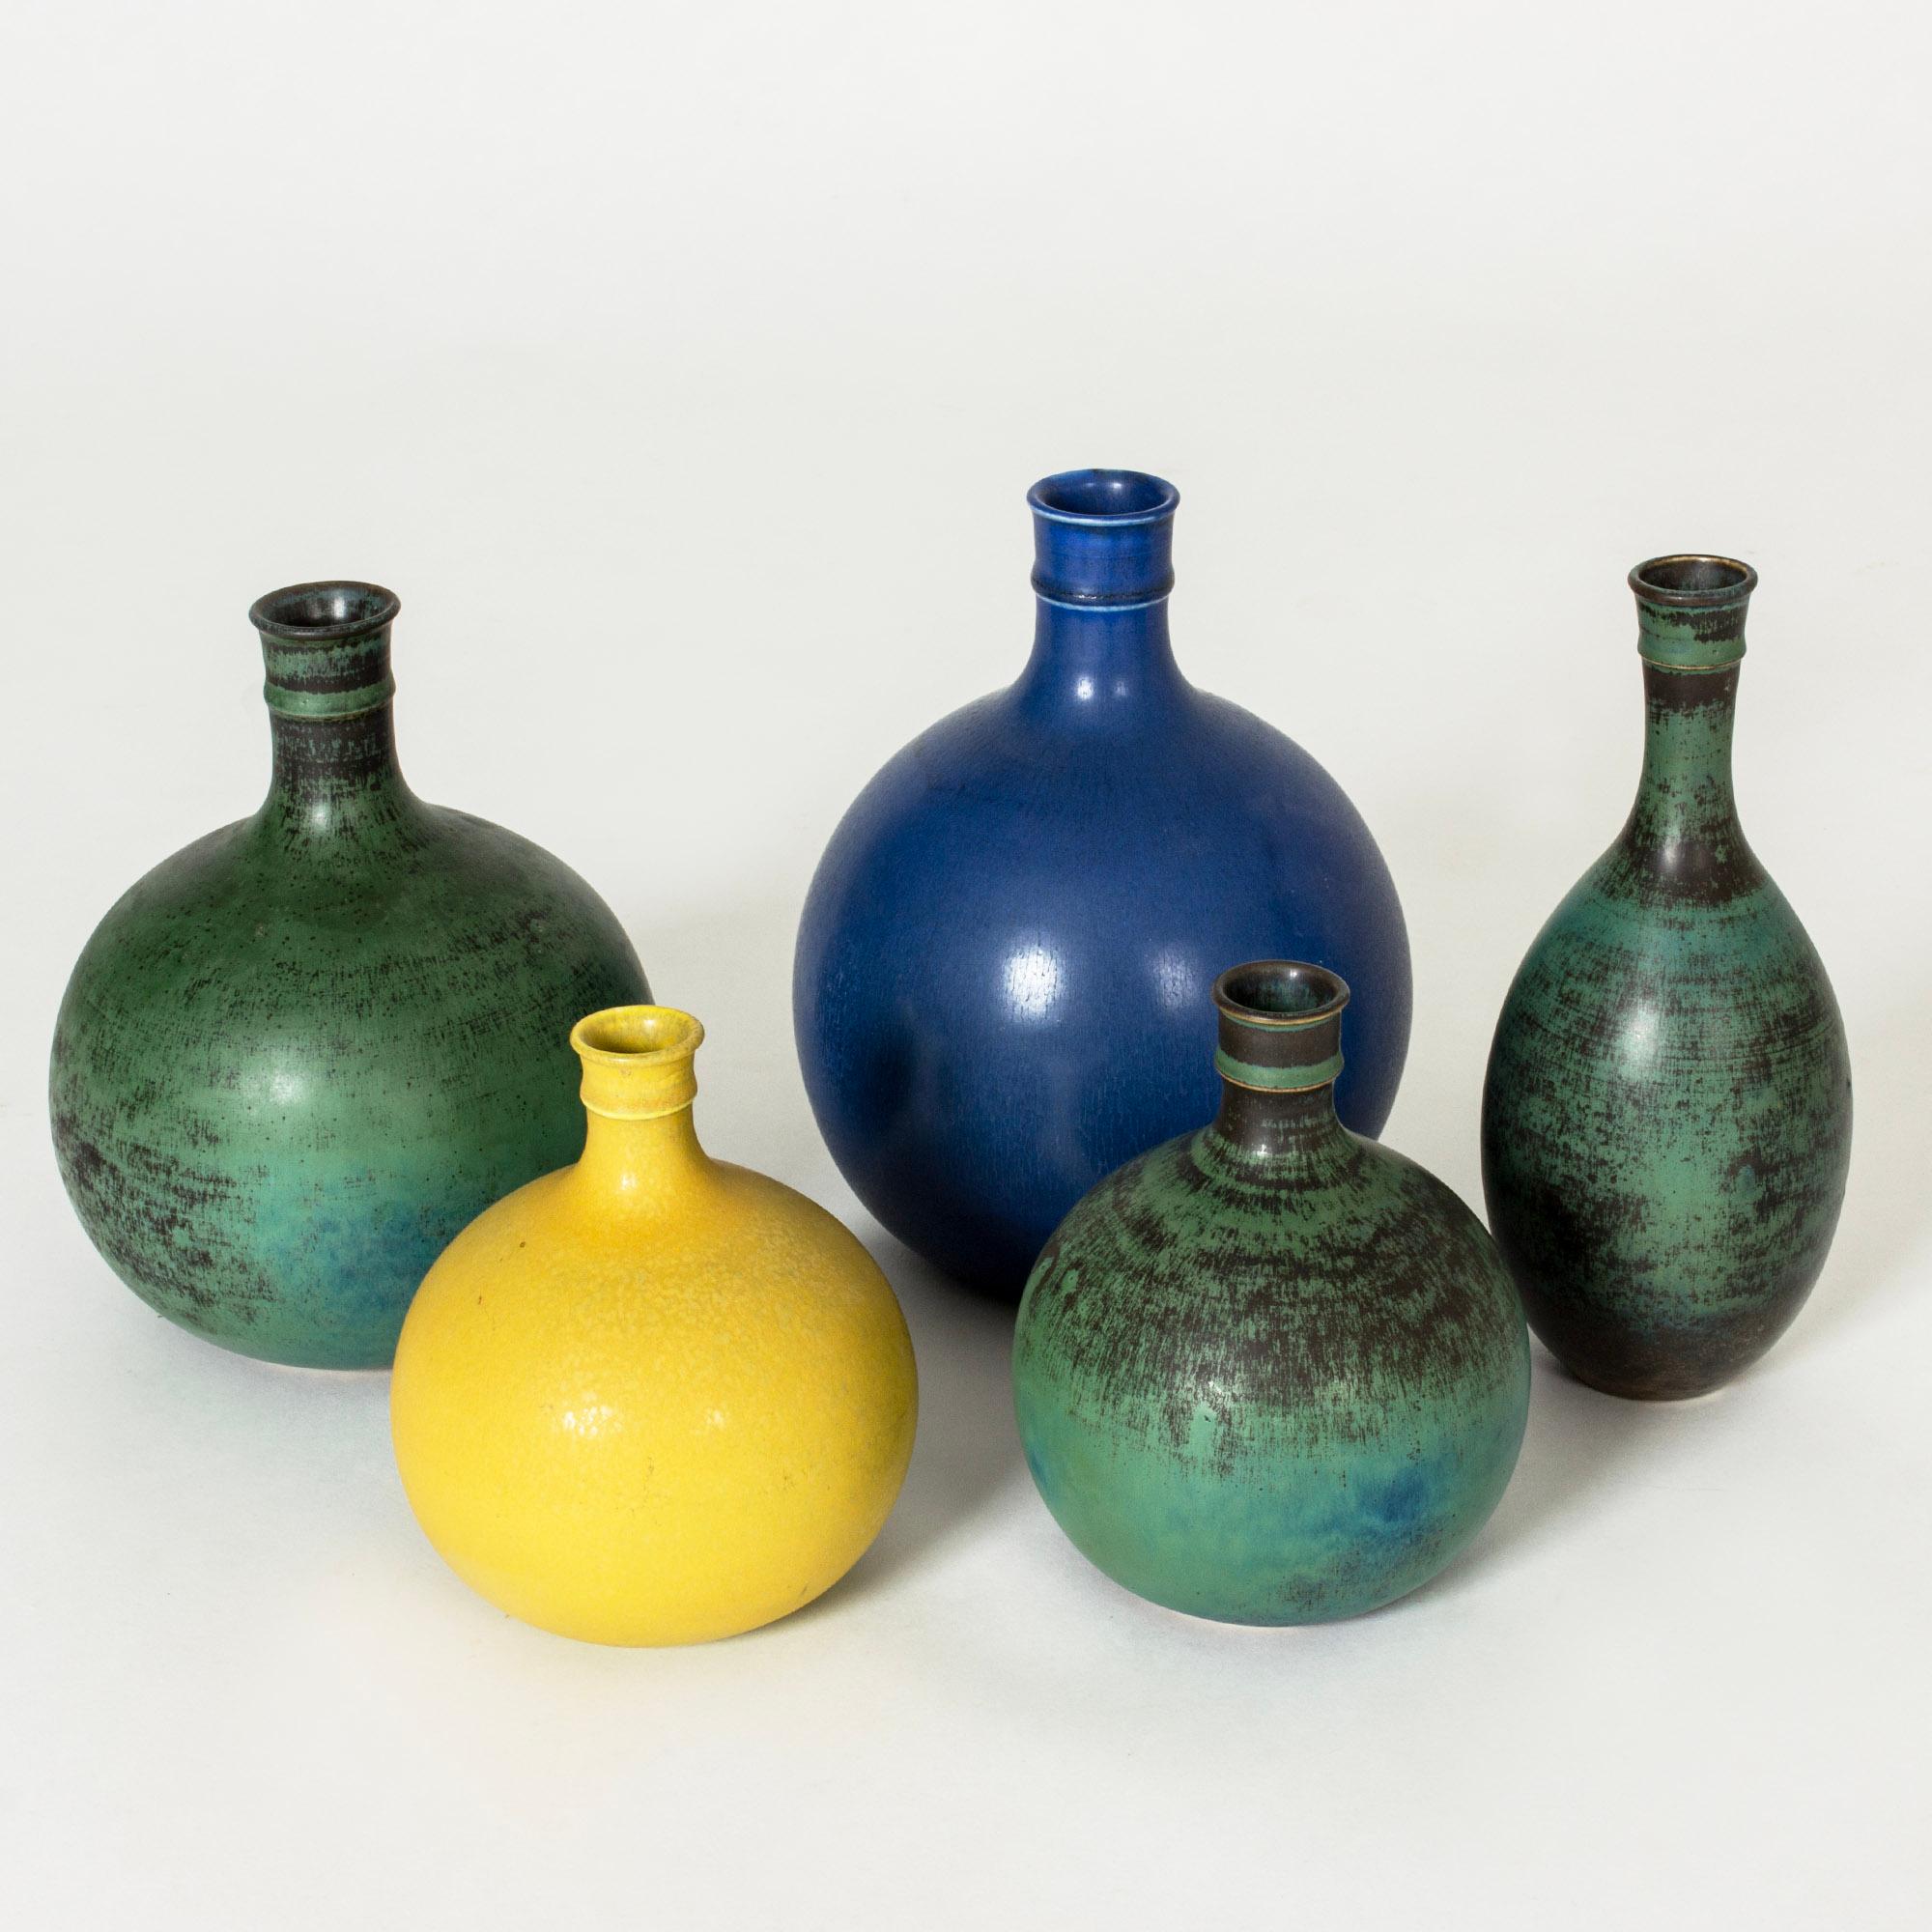 Set of five stoneware vases by Stig Lindberg, from the series “Drejargods”. Bulbous forms with striking colors. One blue and one yellow, the others green with hues of blue and streaks of dark brown.

Height 13.5-20 cm, Diameter 7.5-15 cm